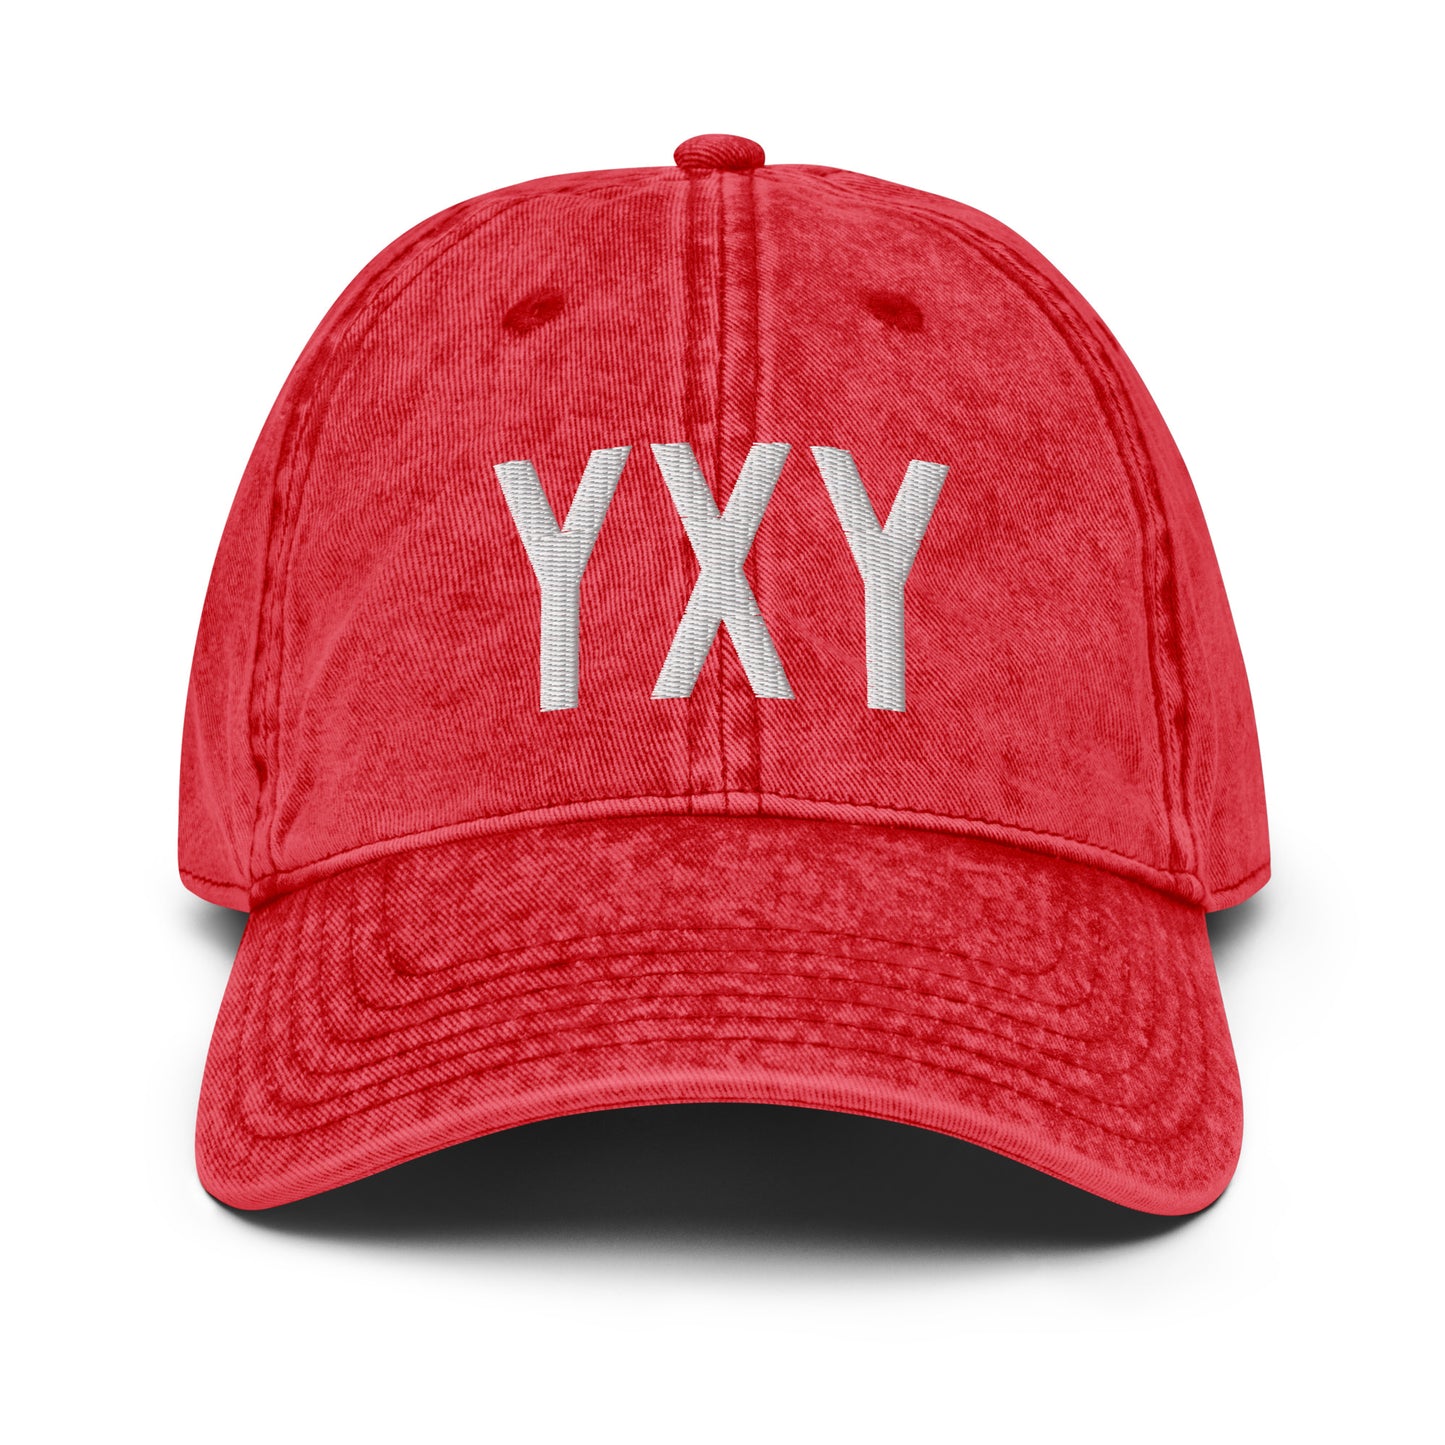 Airport Code Twill Cap - White • YXY Whitehorse • YHM Designs - Image 22